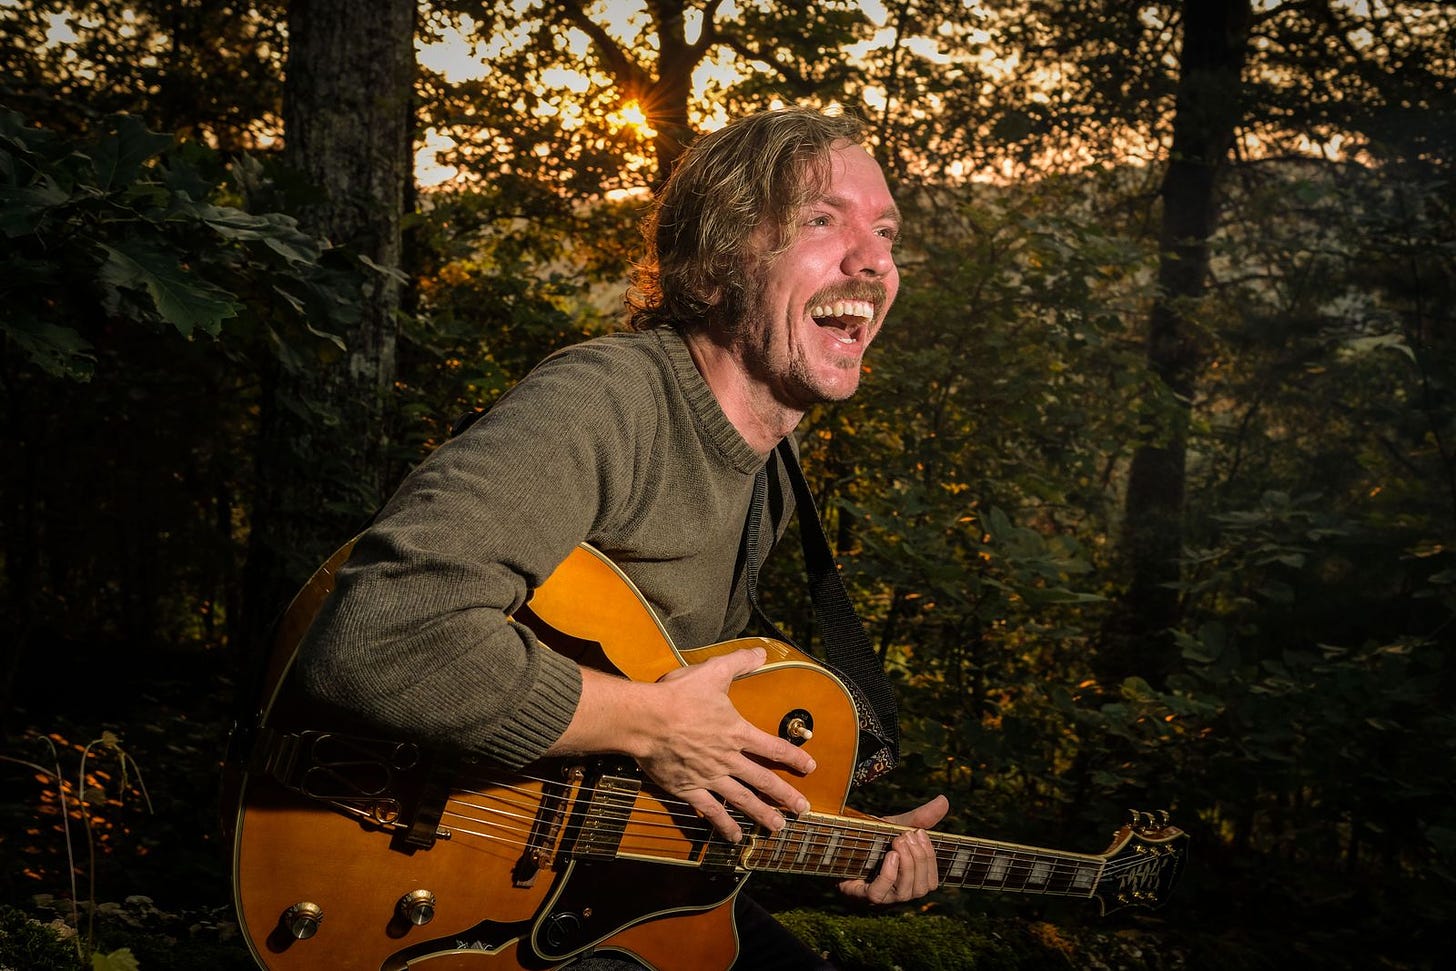 A blonde man cradling an acoustic guitar stands in a forest background as the sun sets through the trees behind him. He is laughing and looking away from the camera. His smile is beautiful. It's Michael De Backer.